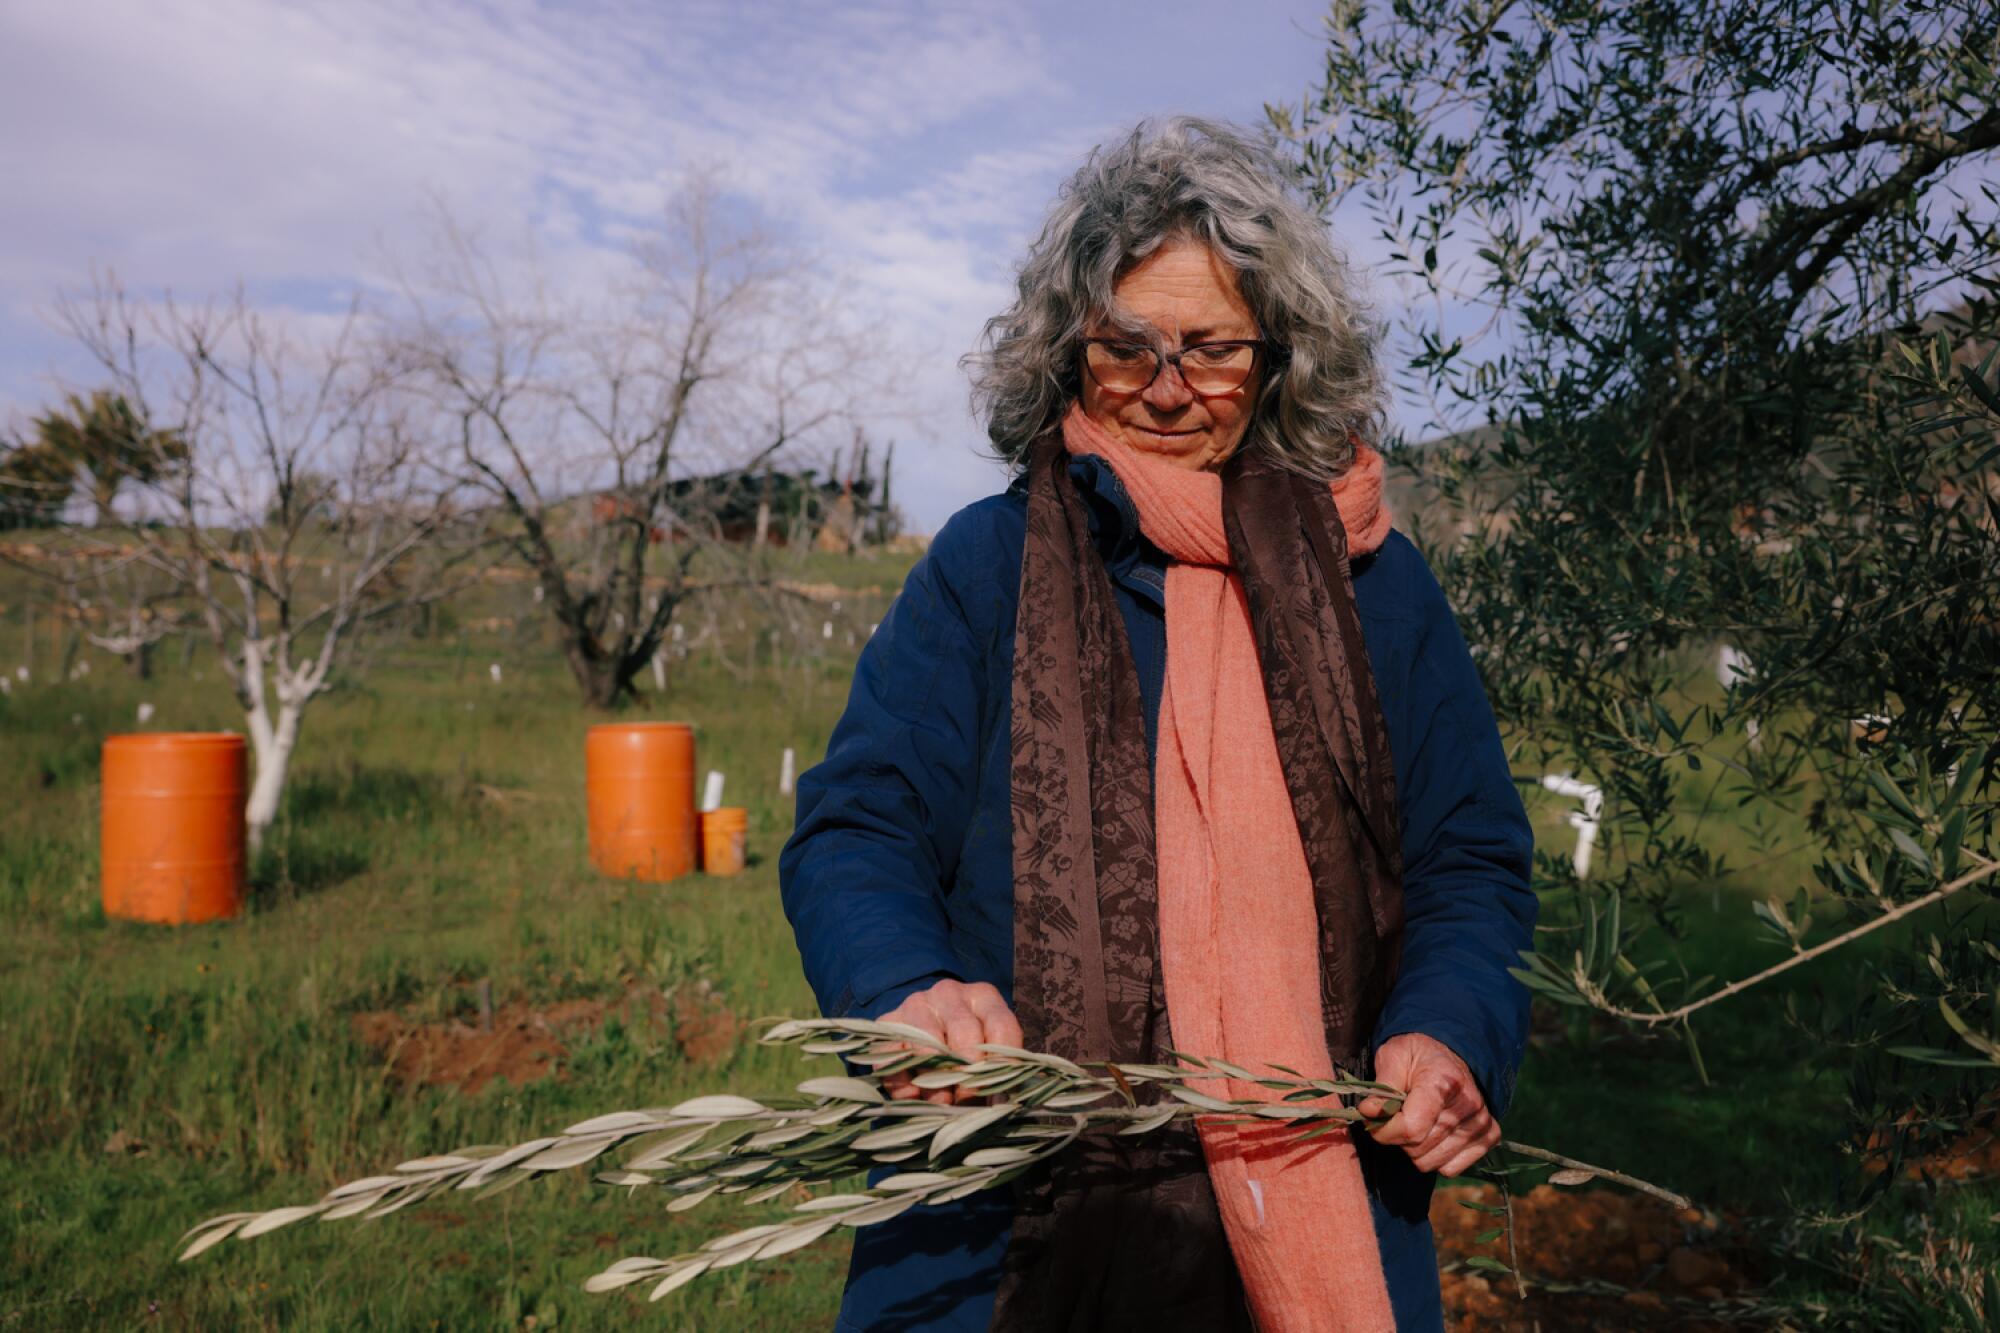 A woman stands outdoors and holds stalks of plants